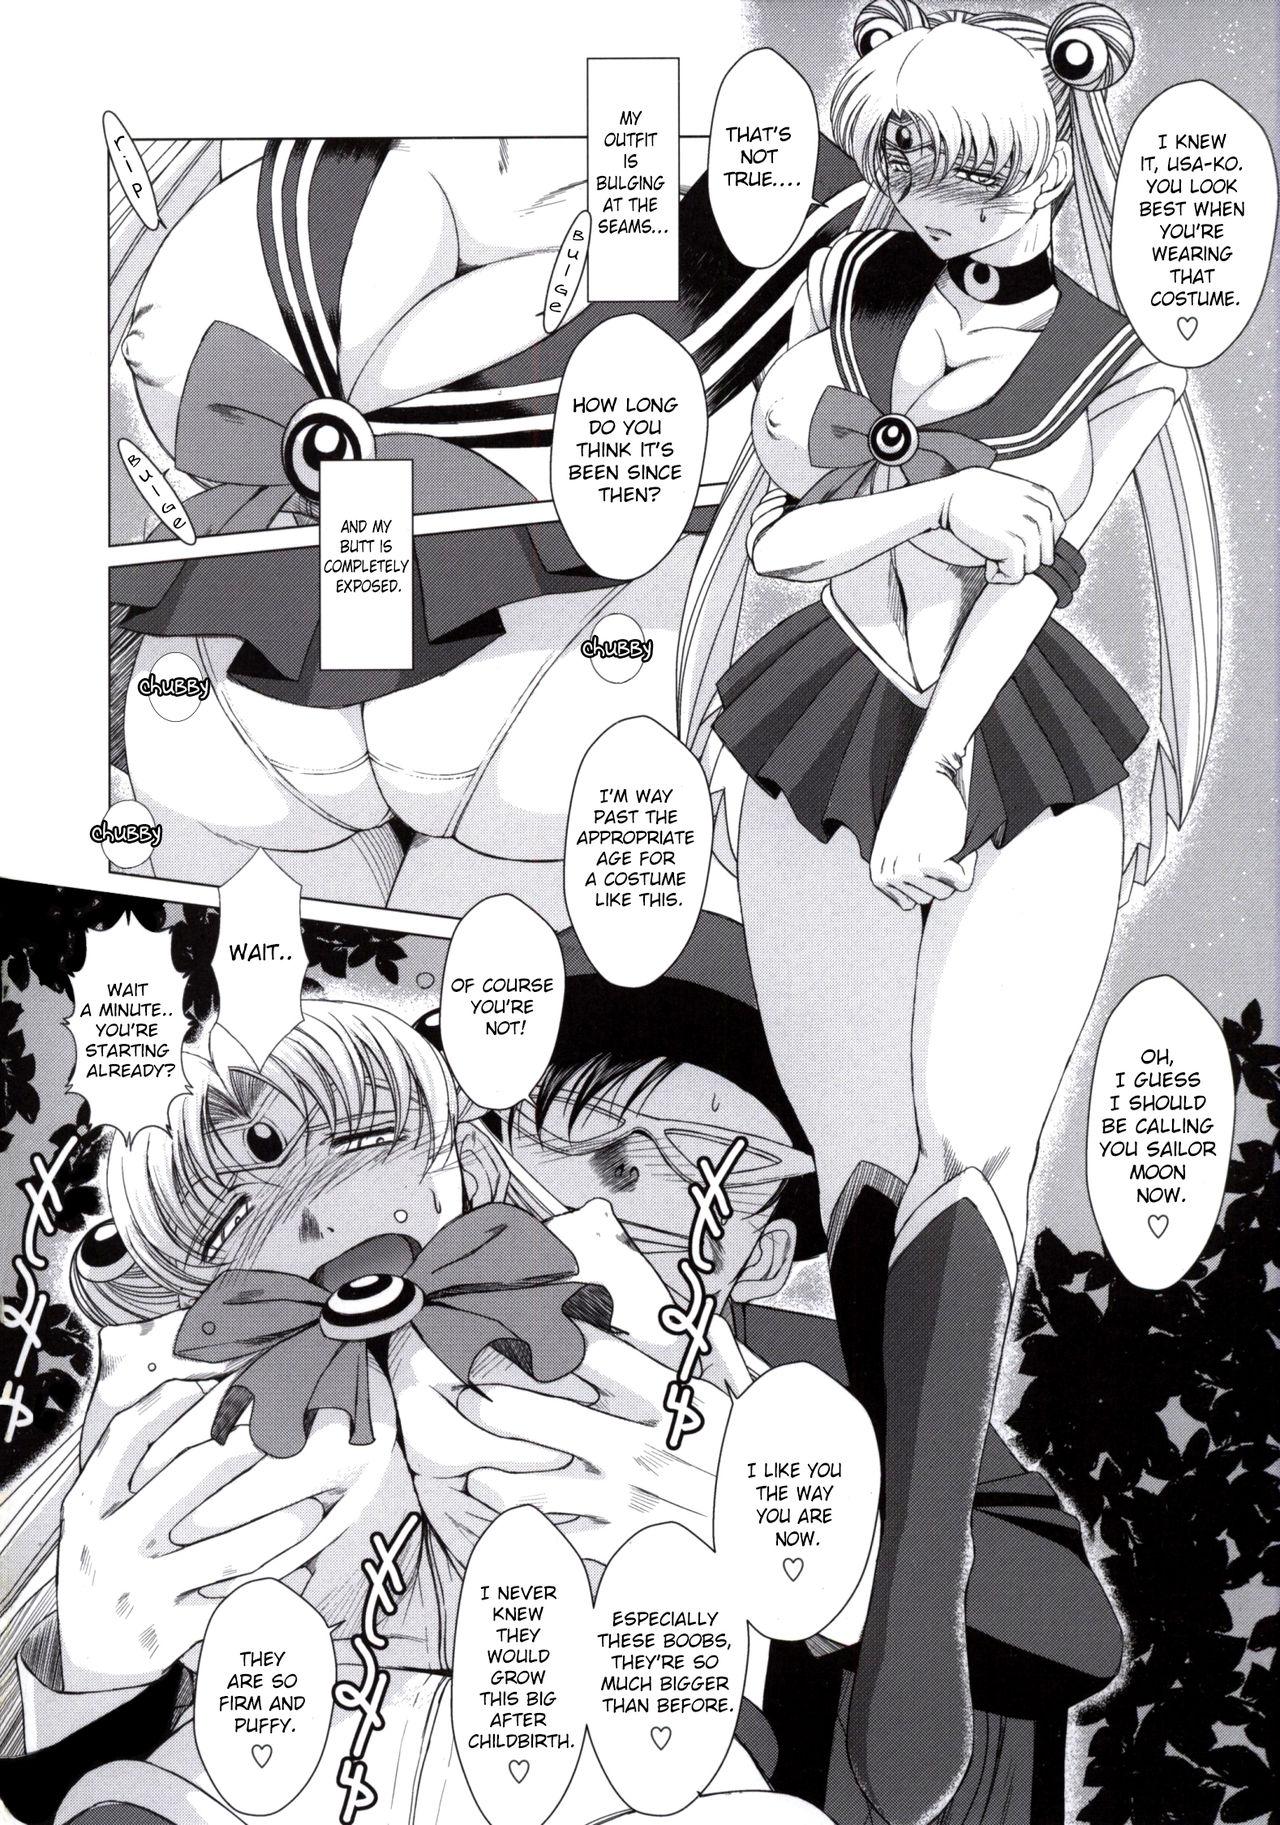 Calle Submission Sailormoon After/Midgard - Sailor moon Ah my goddess Smooth - Page 3